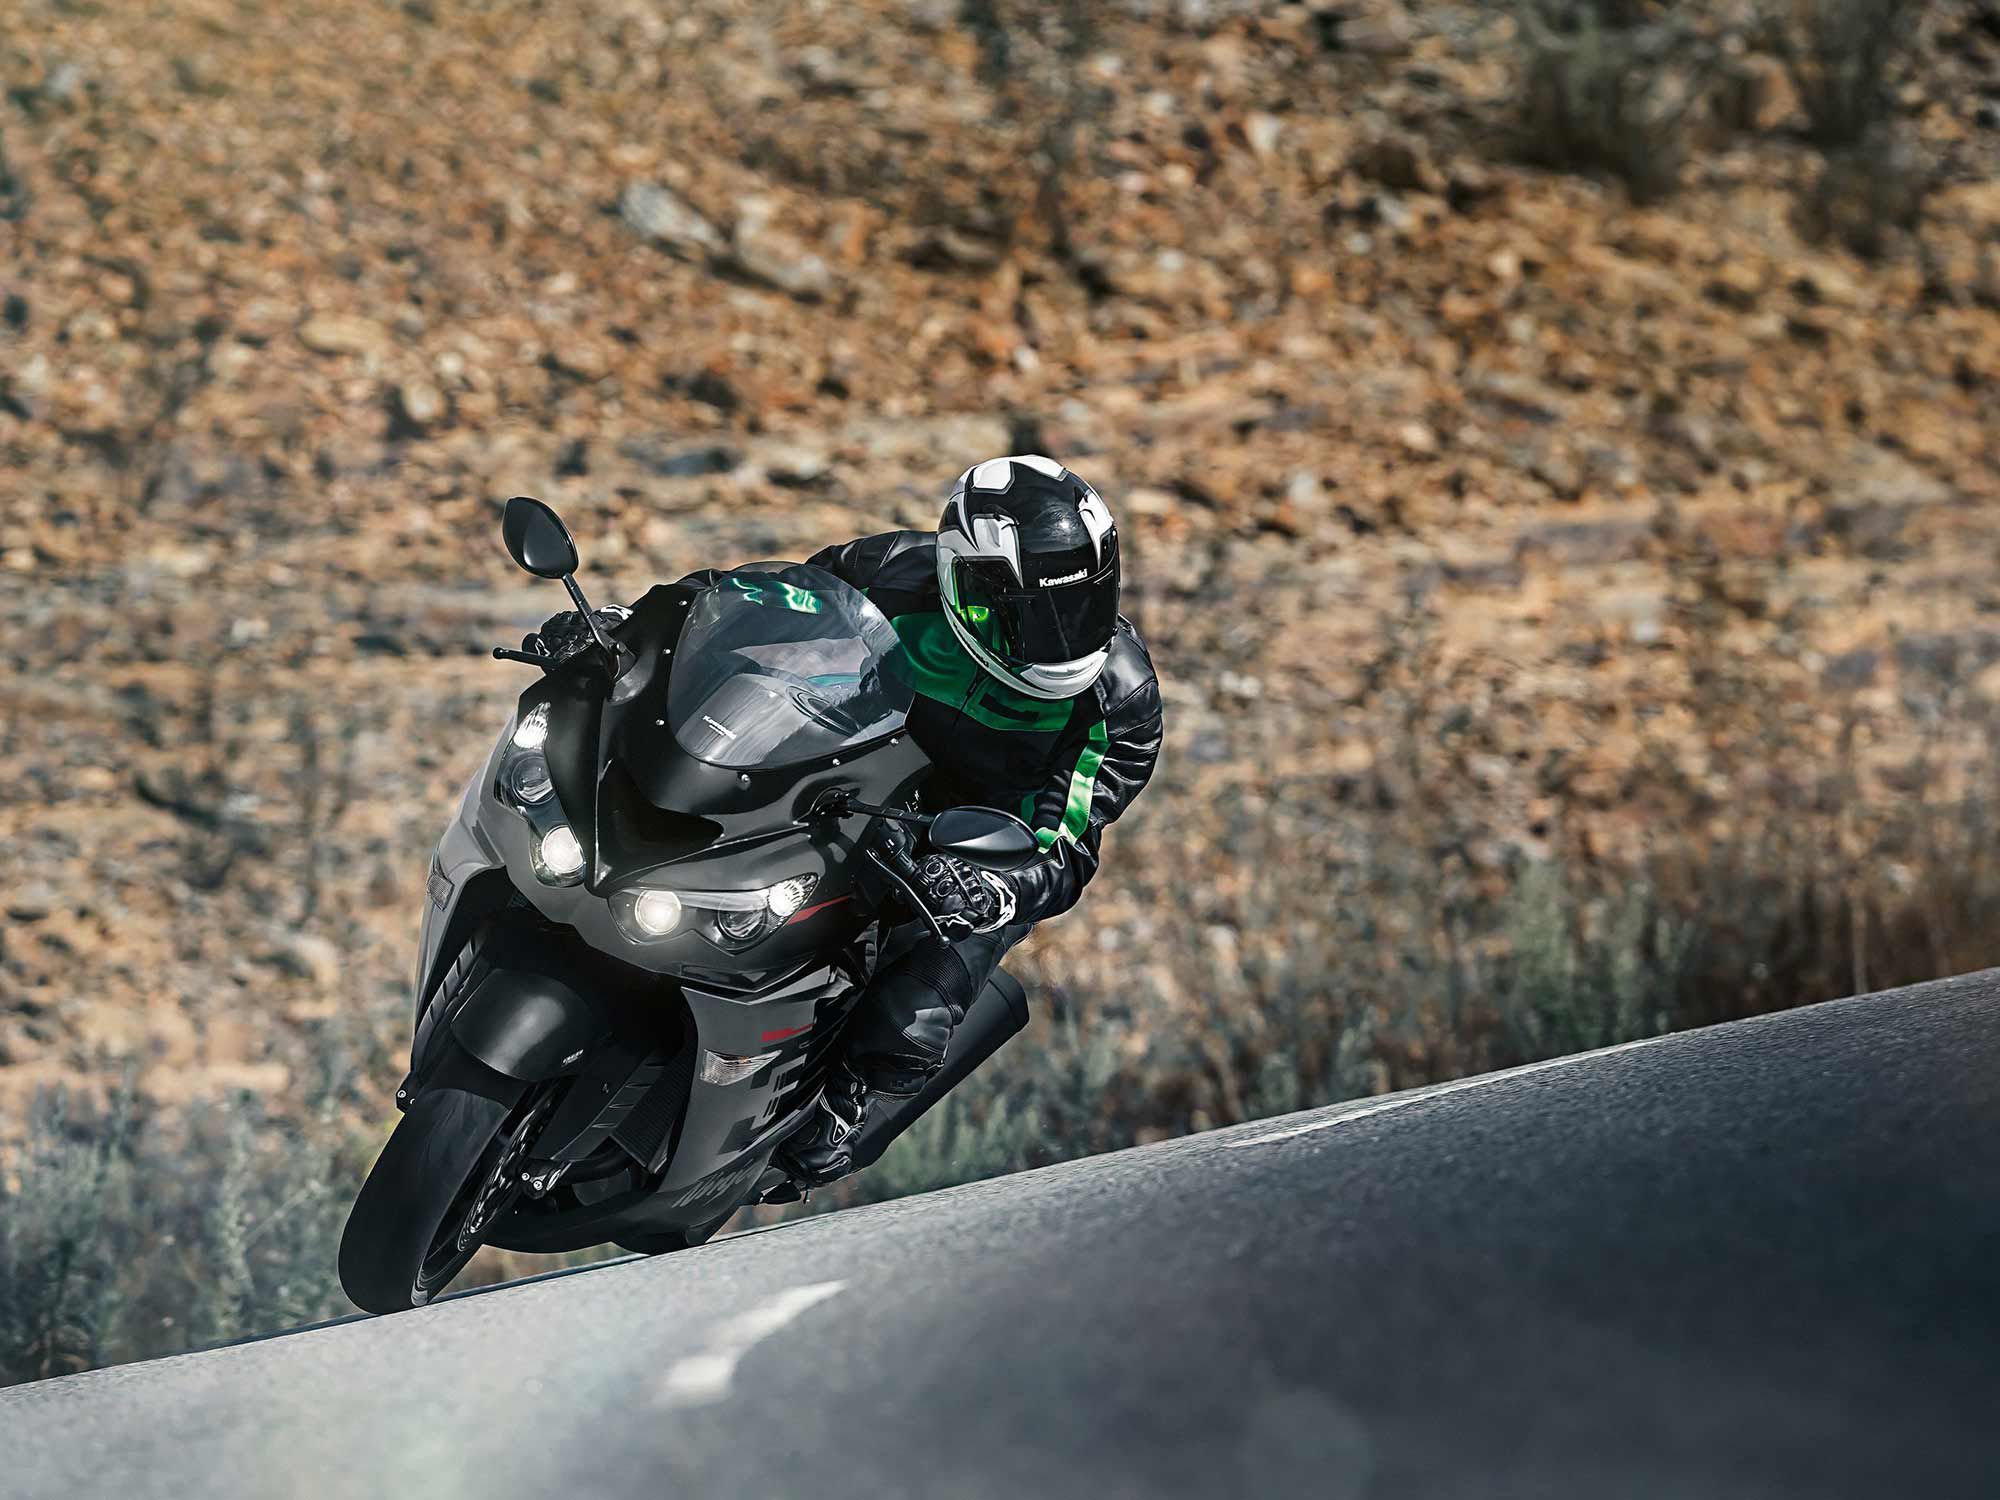 There’s no hiding the ZX-14R’s size. A benefit to the oversized platform is comfort; reach to the bars is short so your torso is more upright than usual on a sportbike.